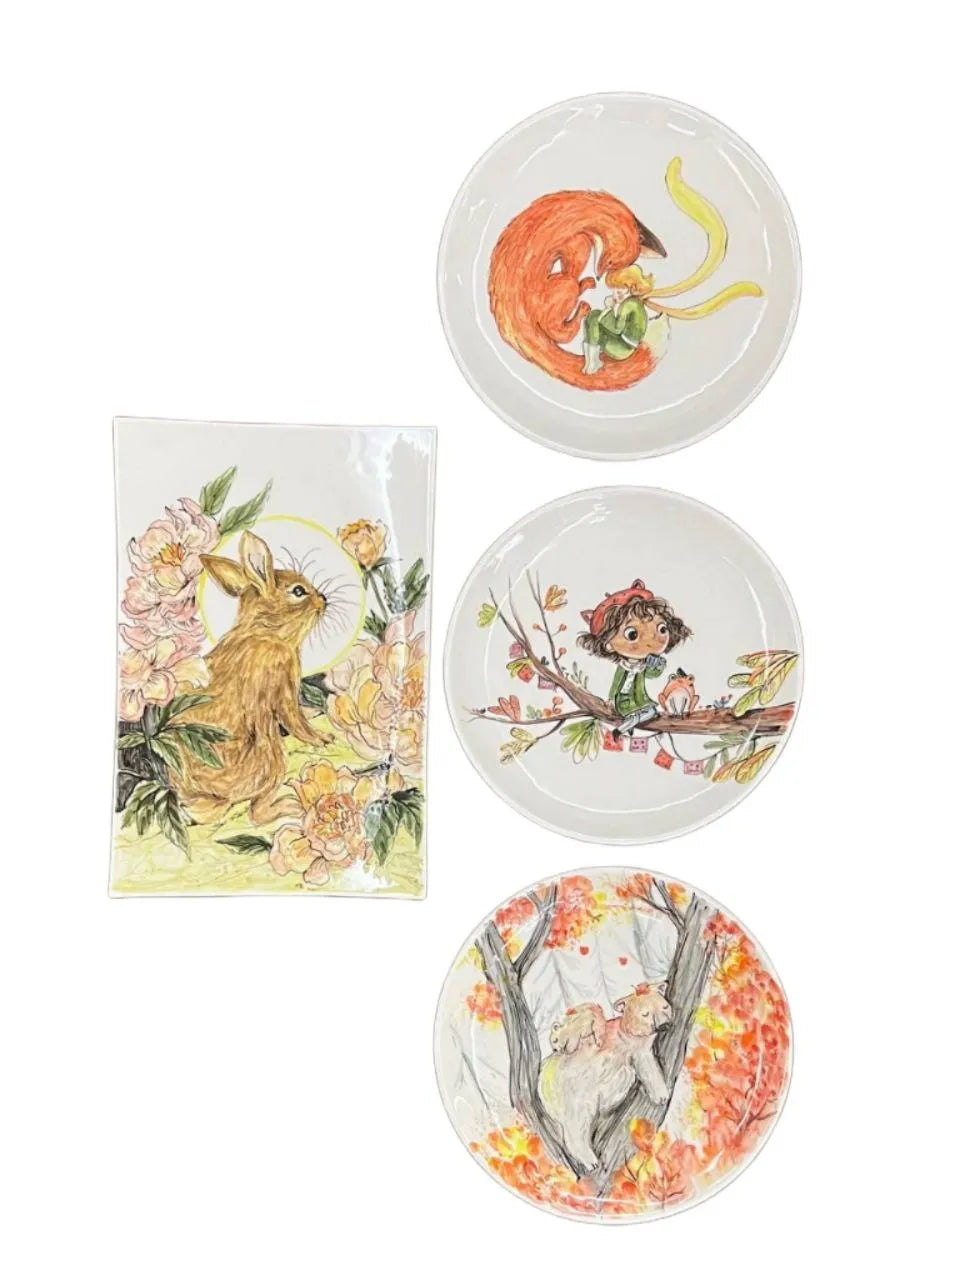 Hand-painted ceramic arts 4 pieces decorative plate to decorate walls in UAE